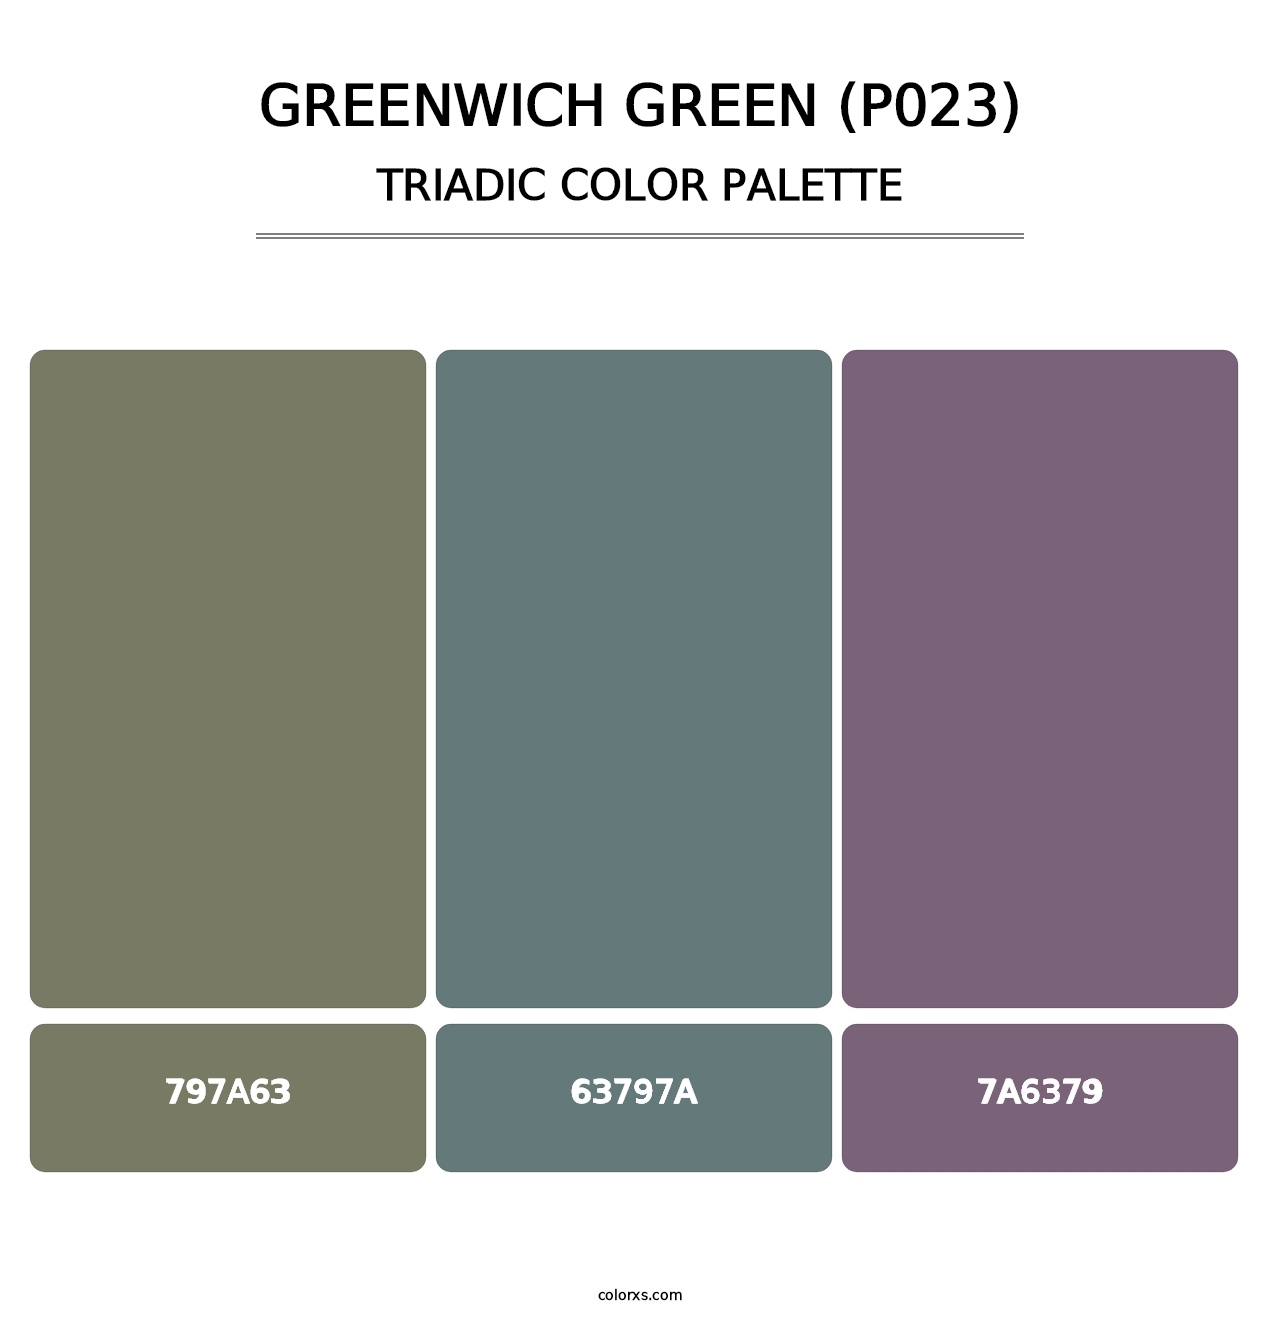 Greenwich Green (P023) - Triadic Color Palette